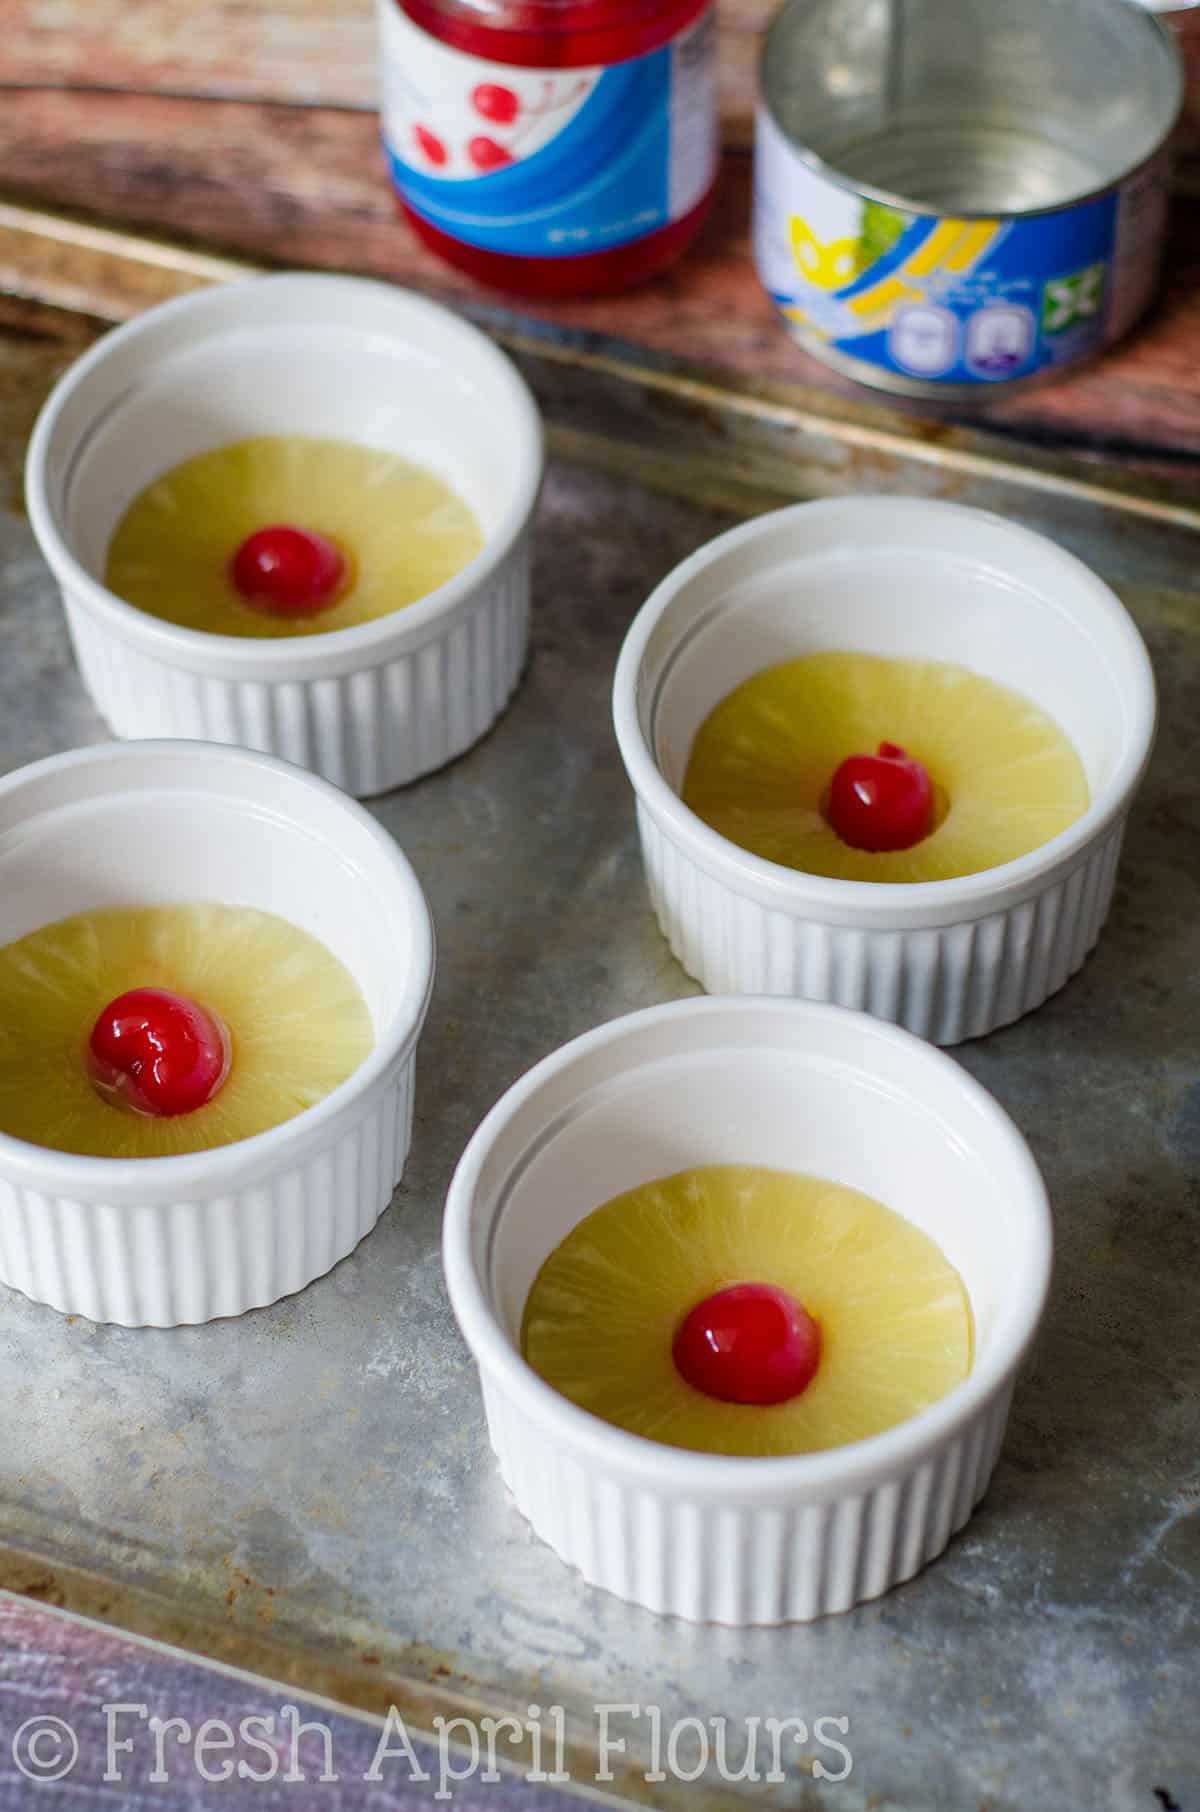 Four ramekins prepared with a pineapple ring and cherry in the middle to make mini pineapple upside down cakes.